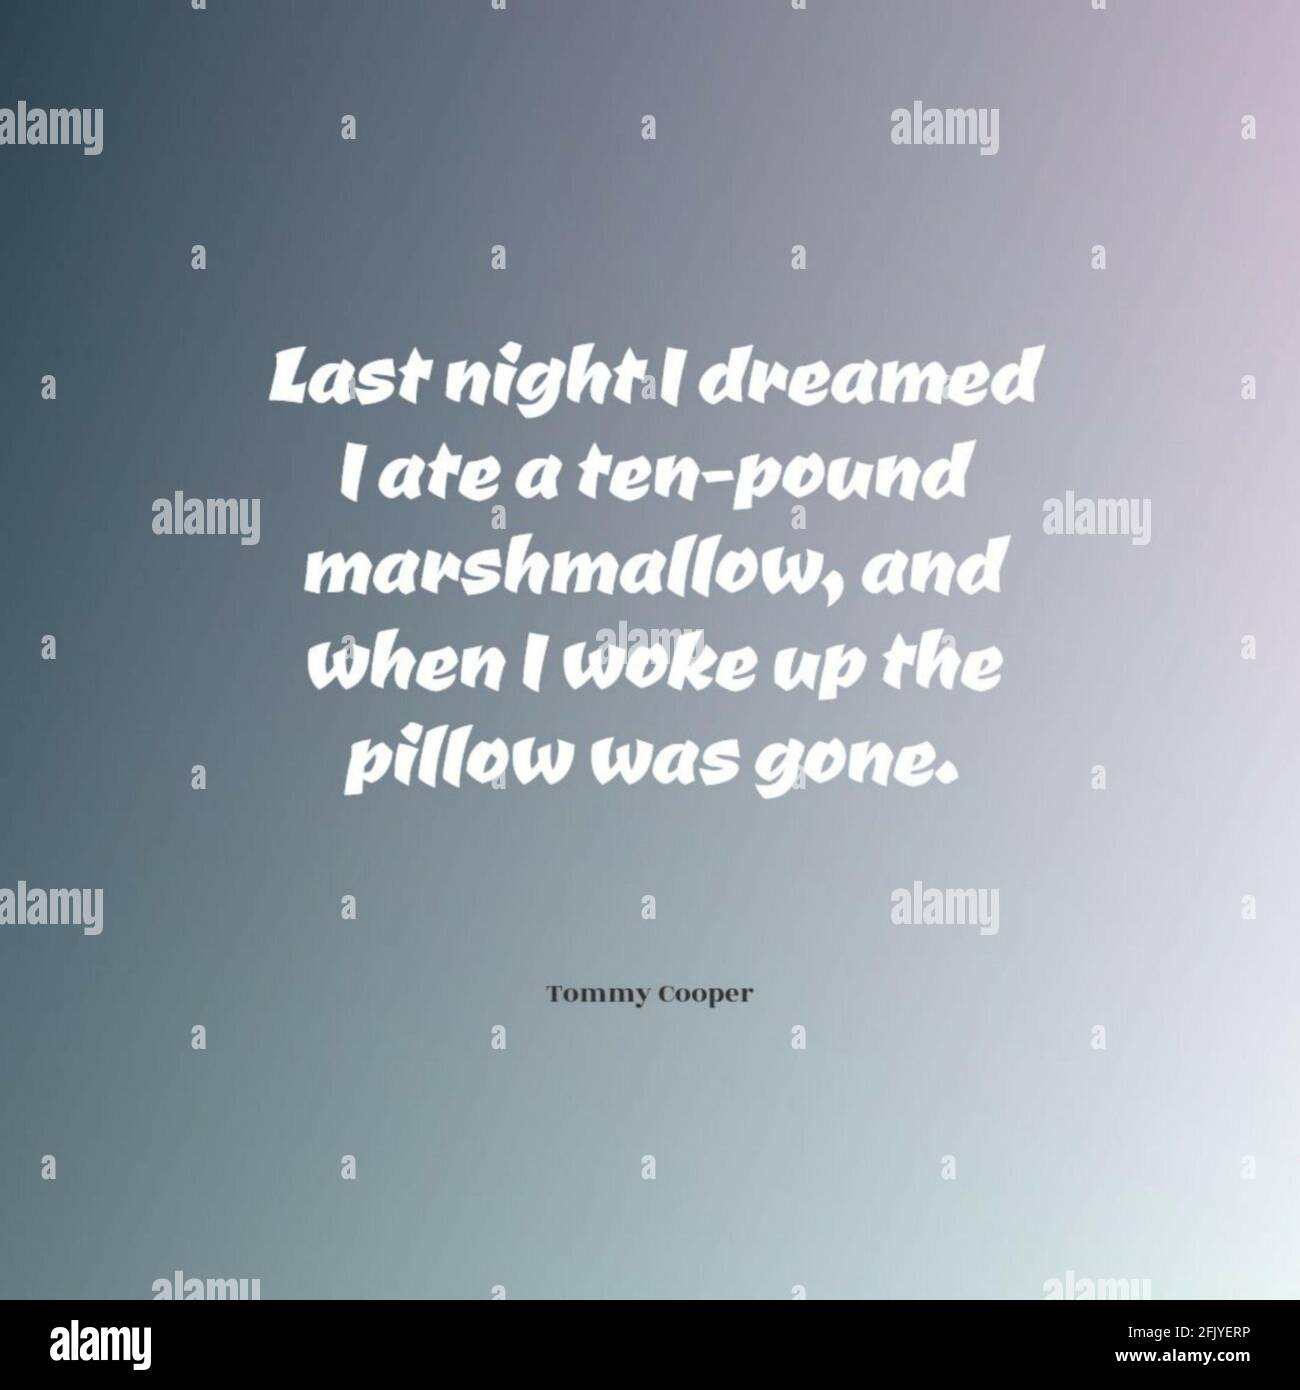 Funny quote about an accident in the dream on a black and white background Stock Photo